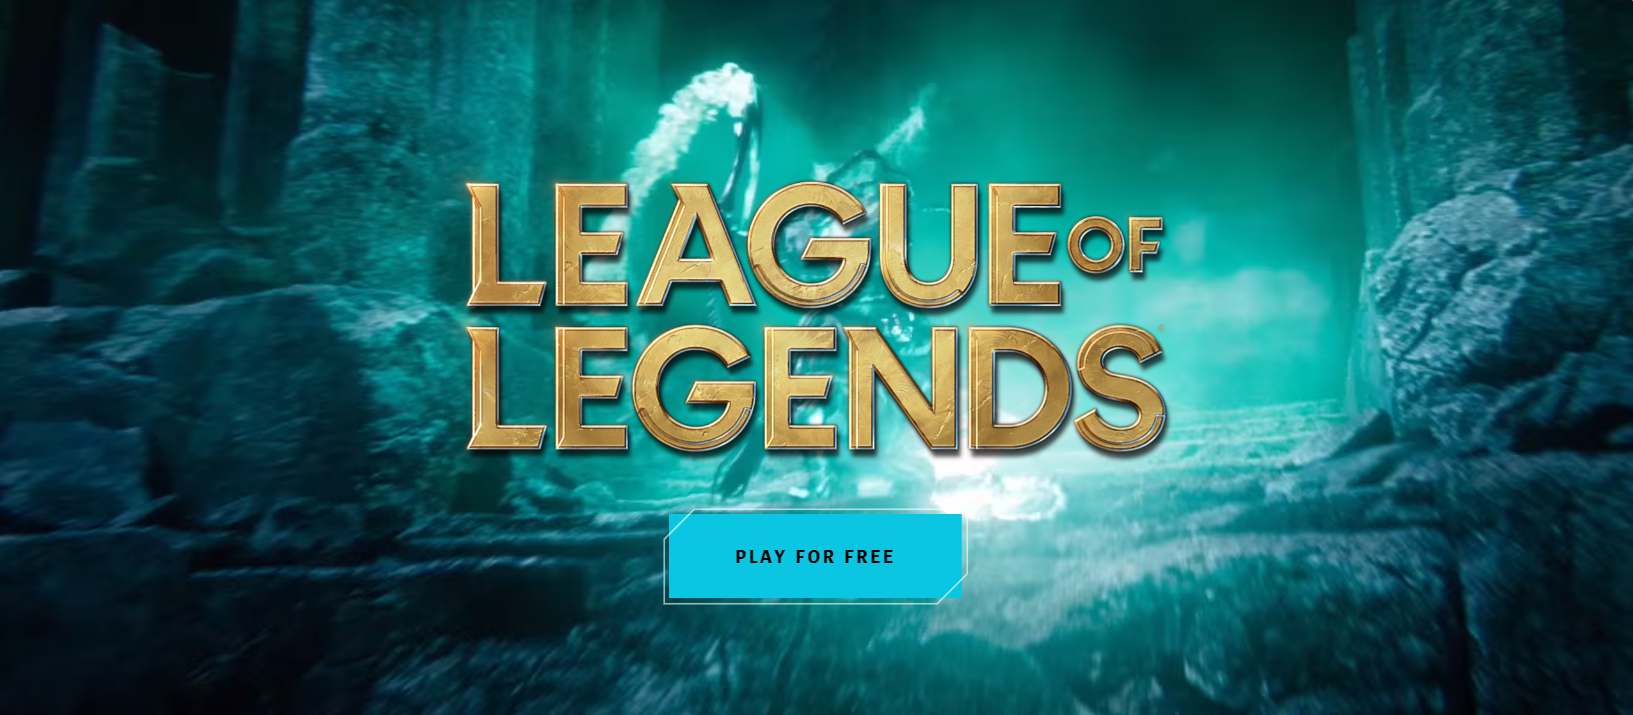 Step Up Your Game: The Advantage of a High-end League of Legends Account